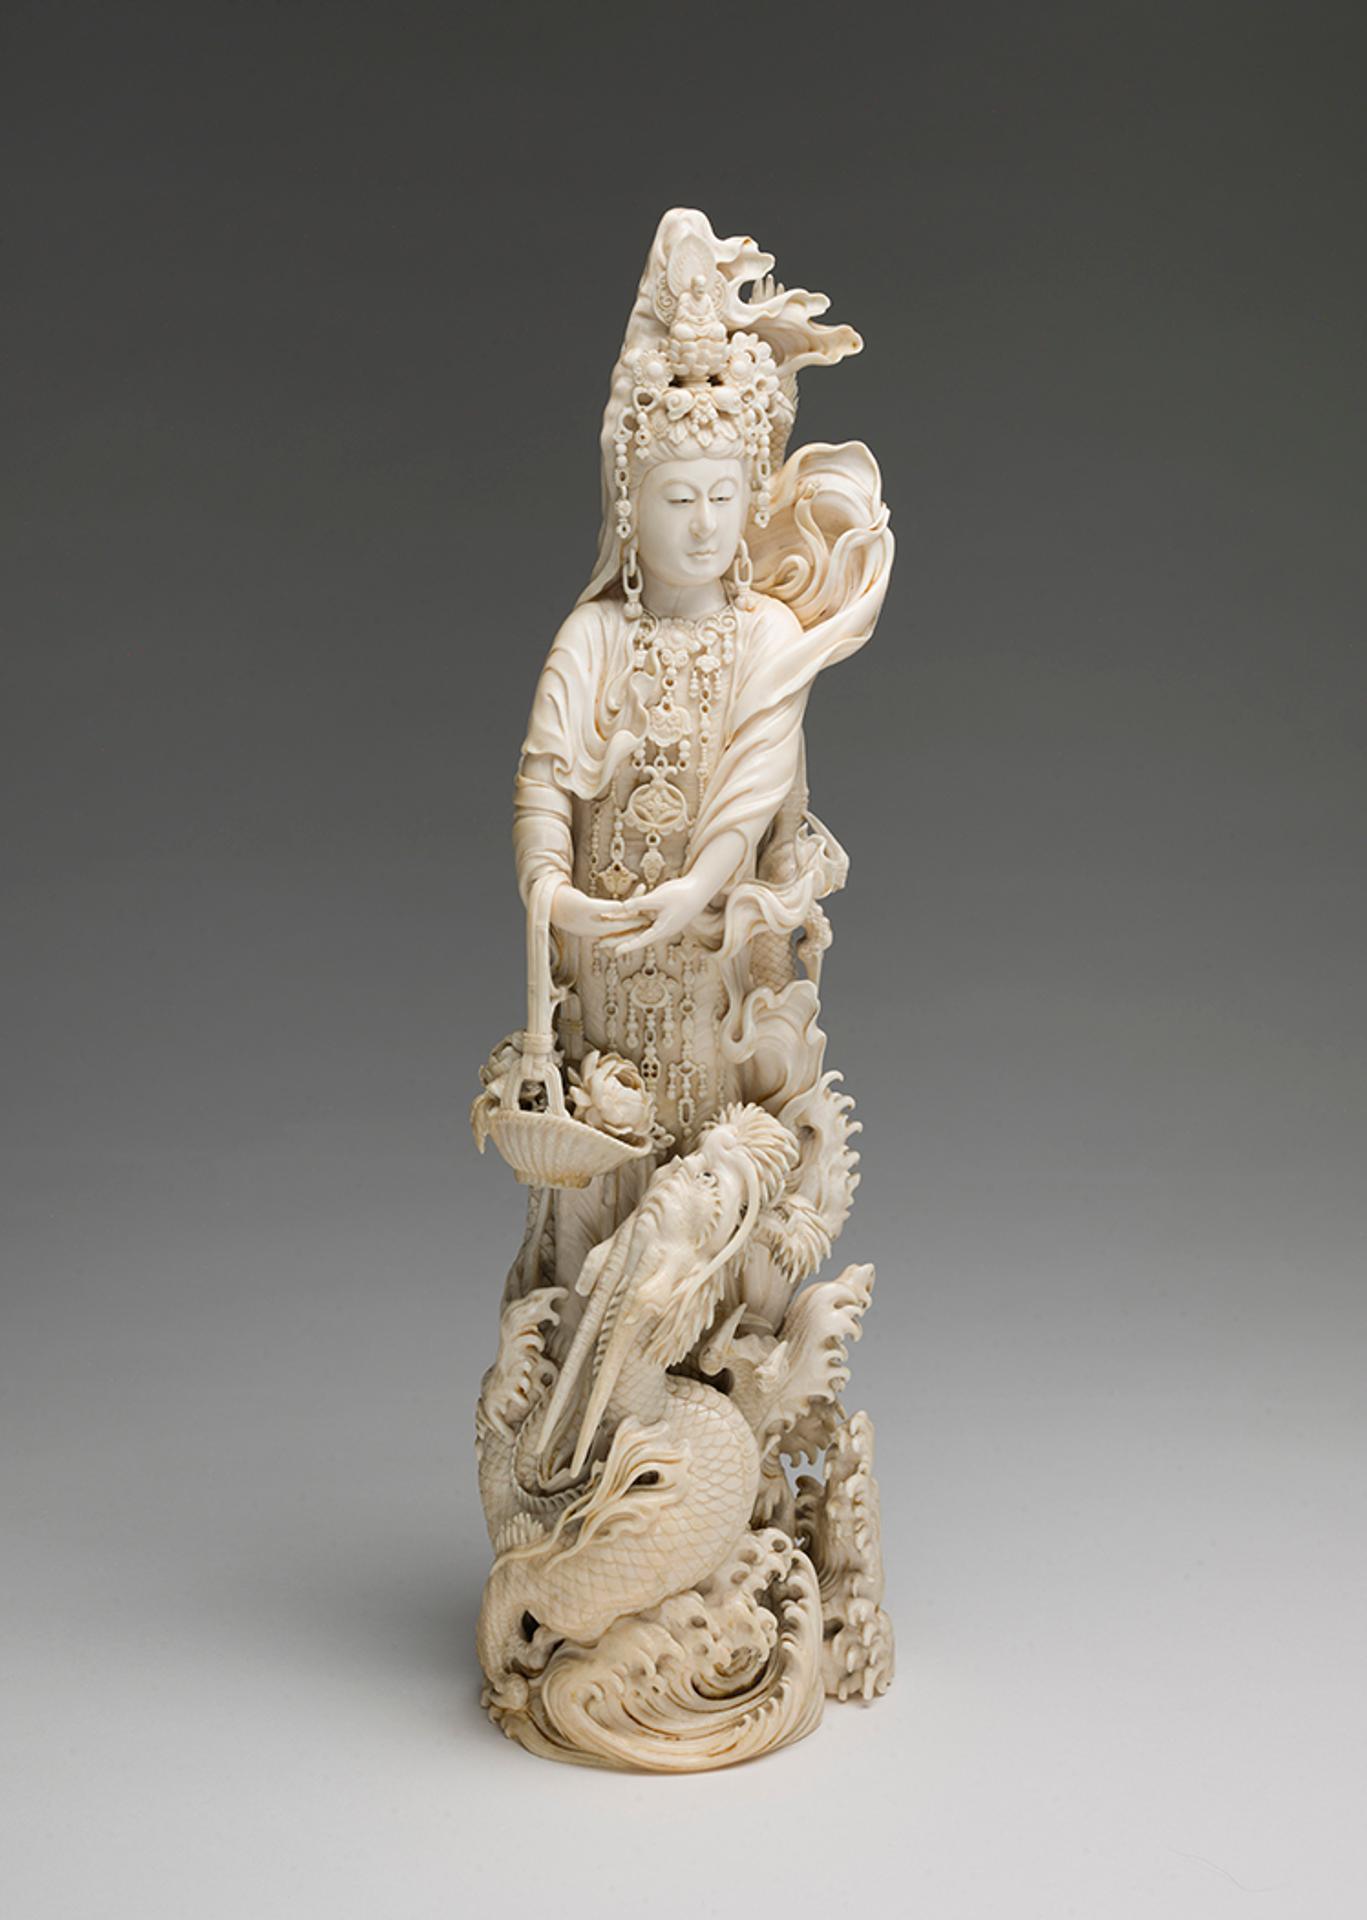 Japanese Art - A Magnificent Japanese Ivory Carved Okimono of Kannon, Tokyo School, Meiji Period, Circa 1905